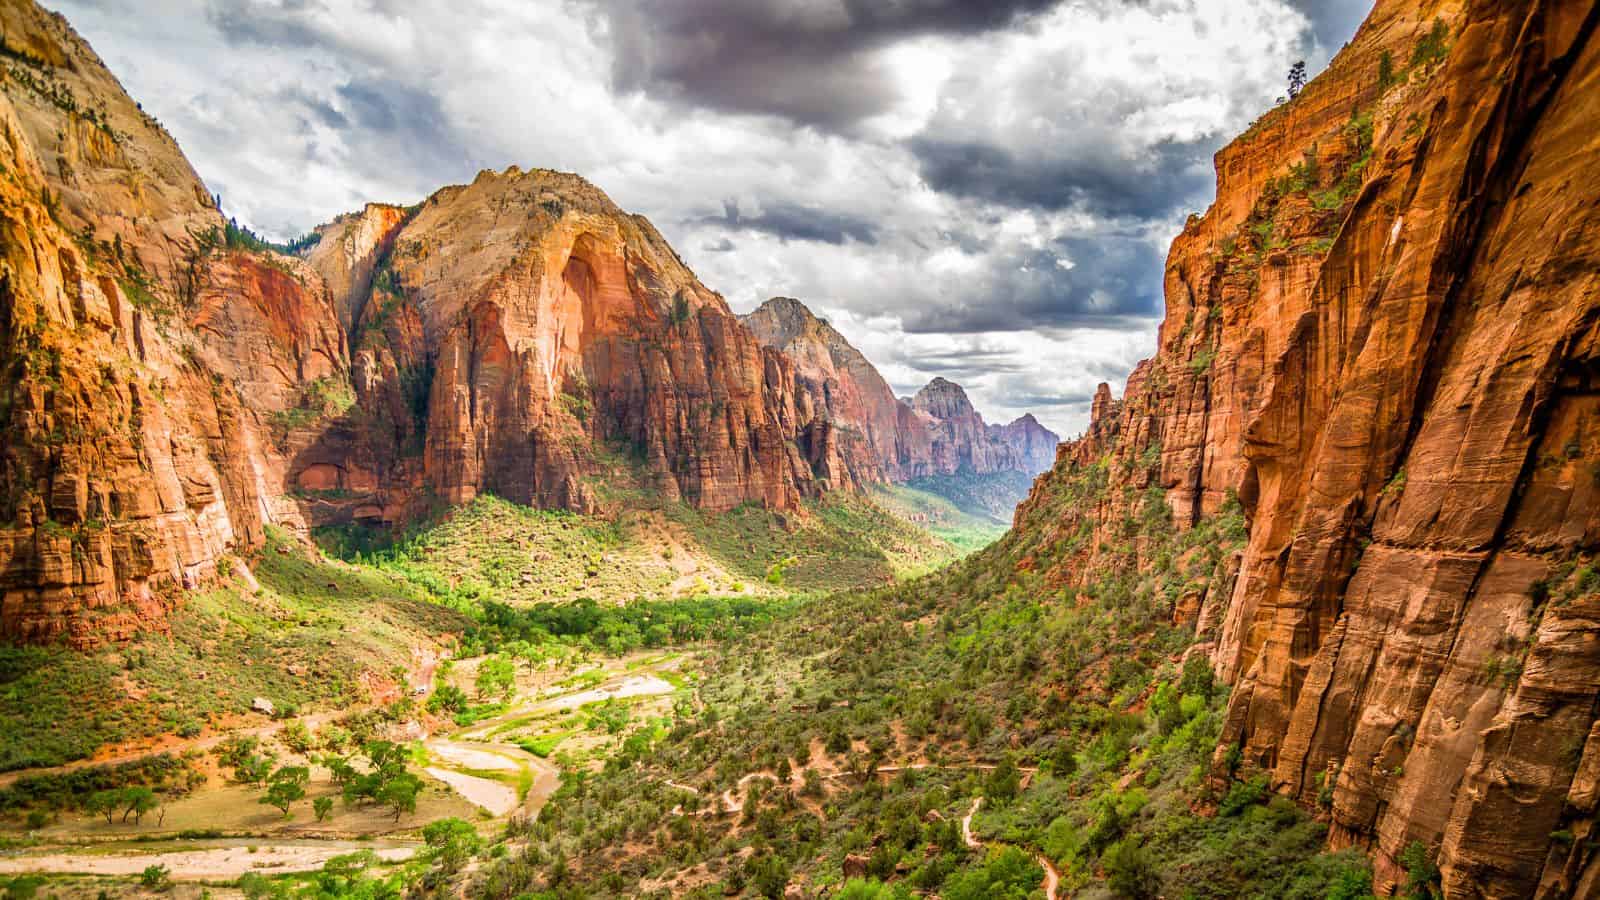 <p><a href="https://www.traveldrafts.com/natural-wonders-united-states/">Travel Drafts</a> writes, “The scenic Zion National Park in Utah has some of the most impressive canyons in the United States.” The national park has different hiking trails for you to take in the views, such as the famous Narrows hike and Angel’s Landing Trail.</p>